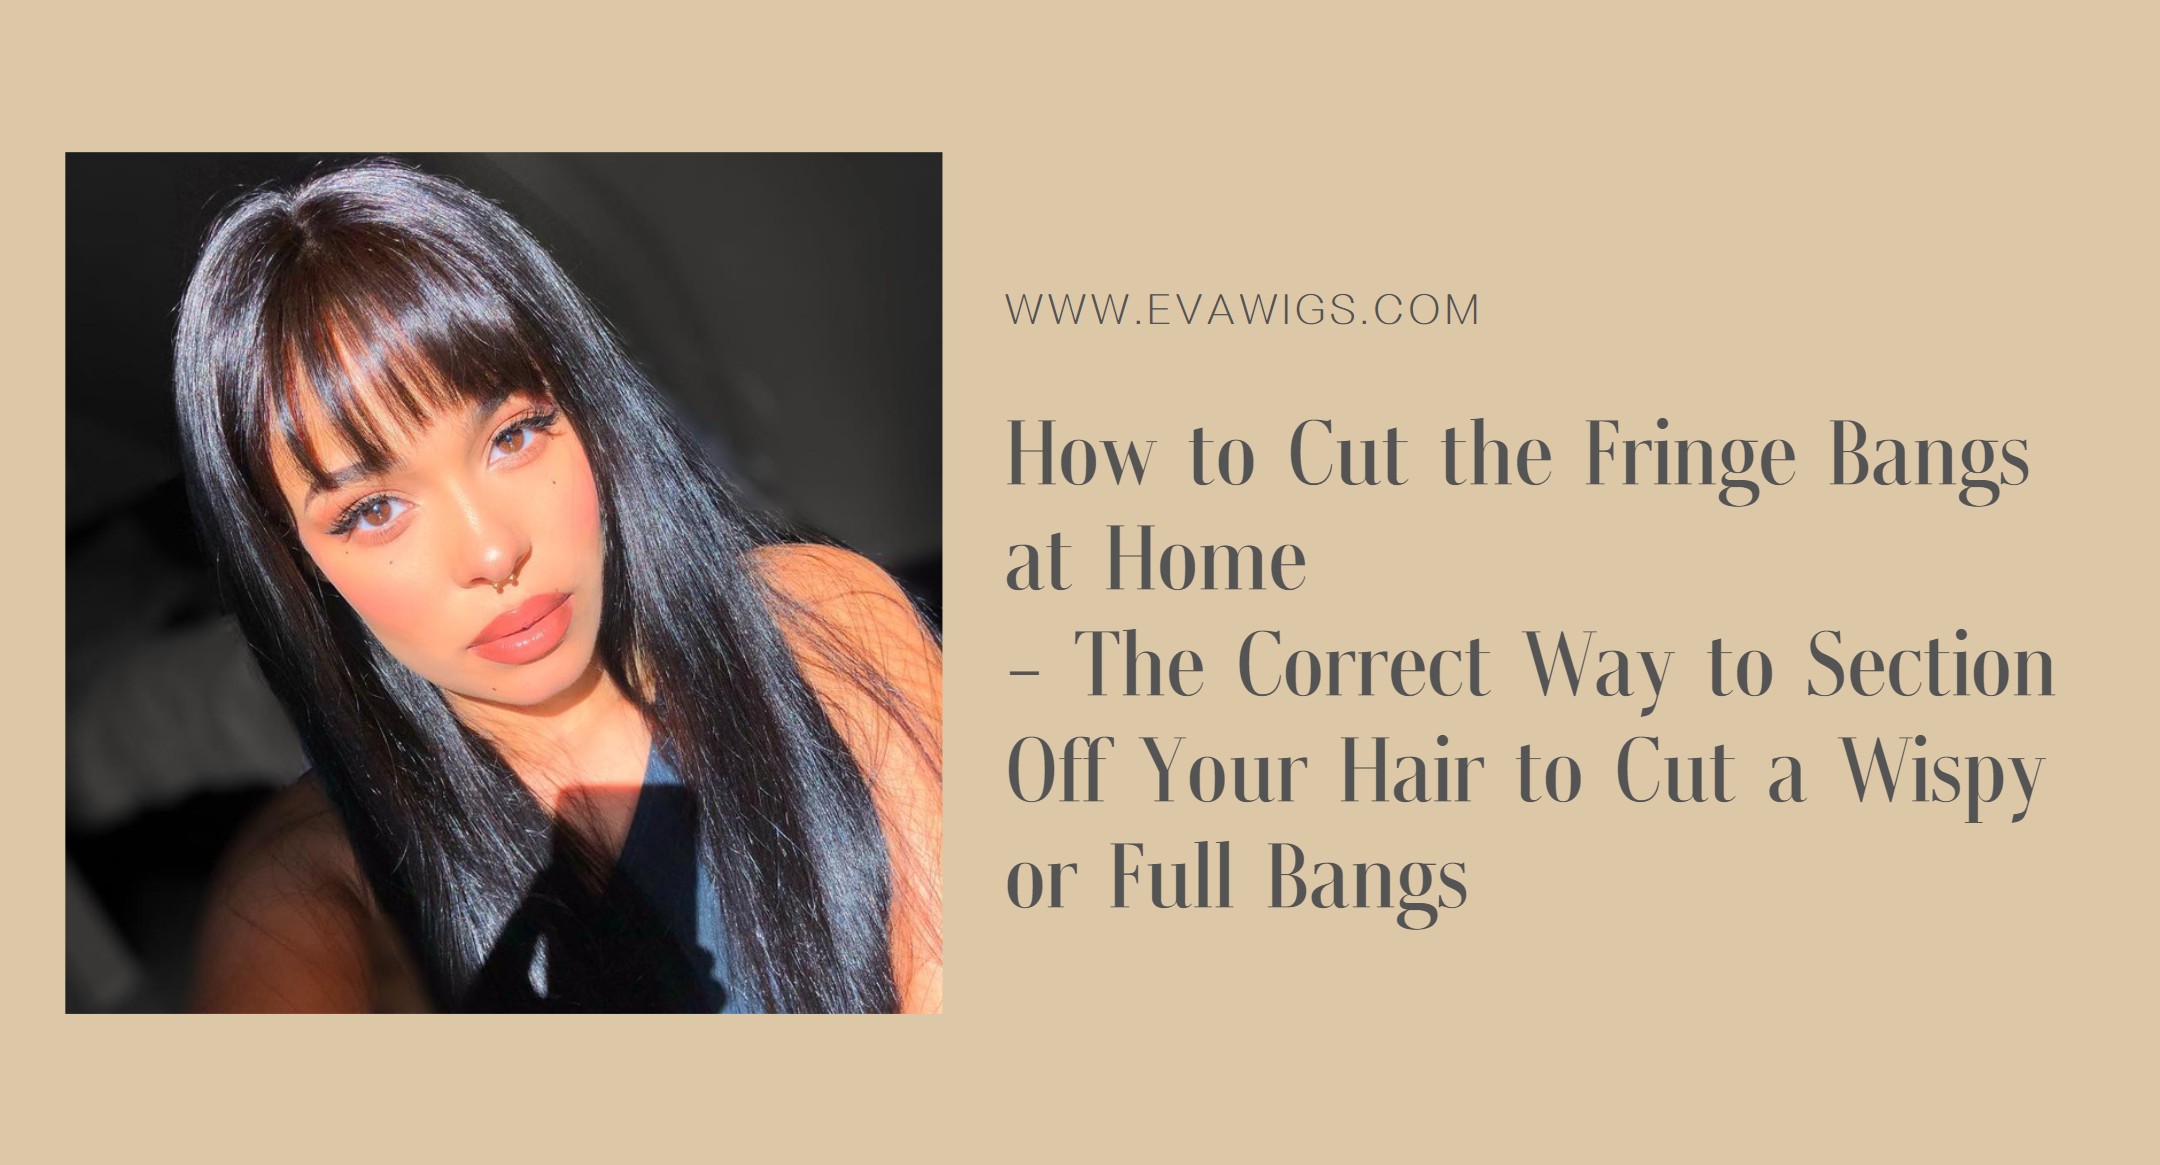 How to Cut the Fringe Bangs at Home - The Correct Way to Section Off Your Hair to Cut a Wispy or Ful